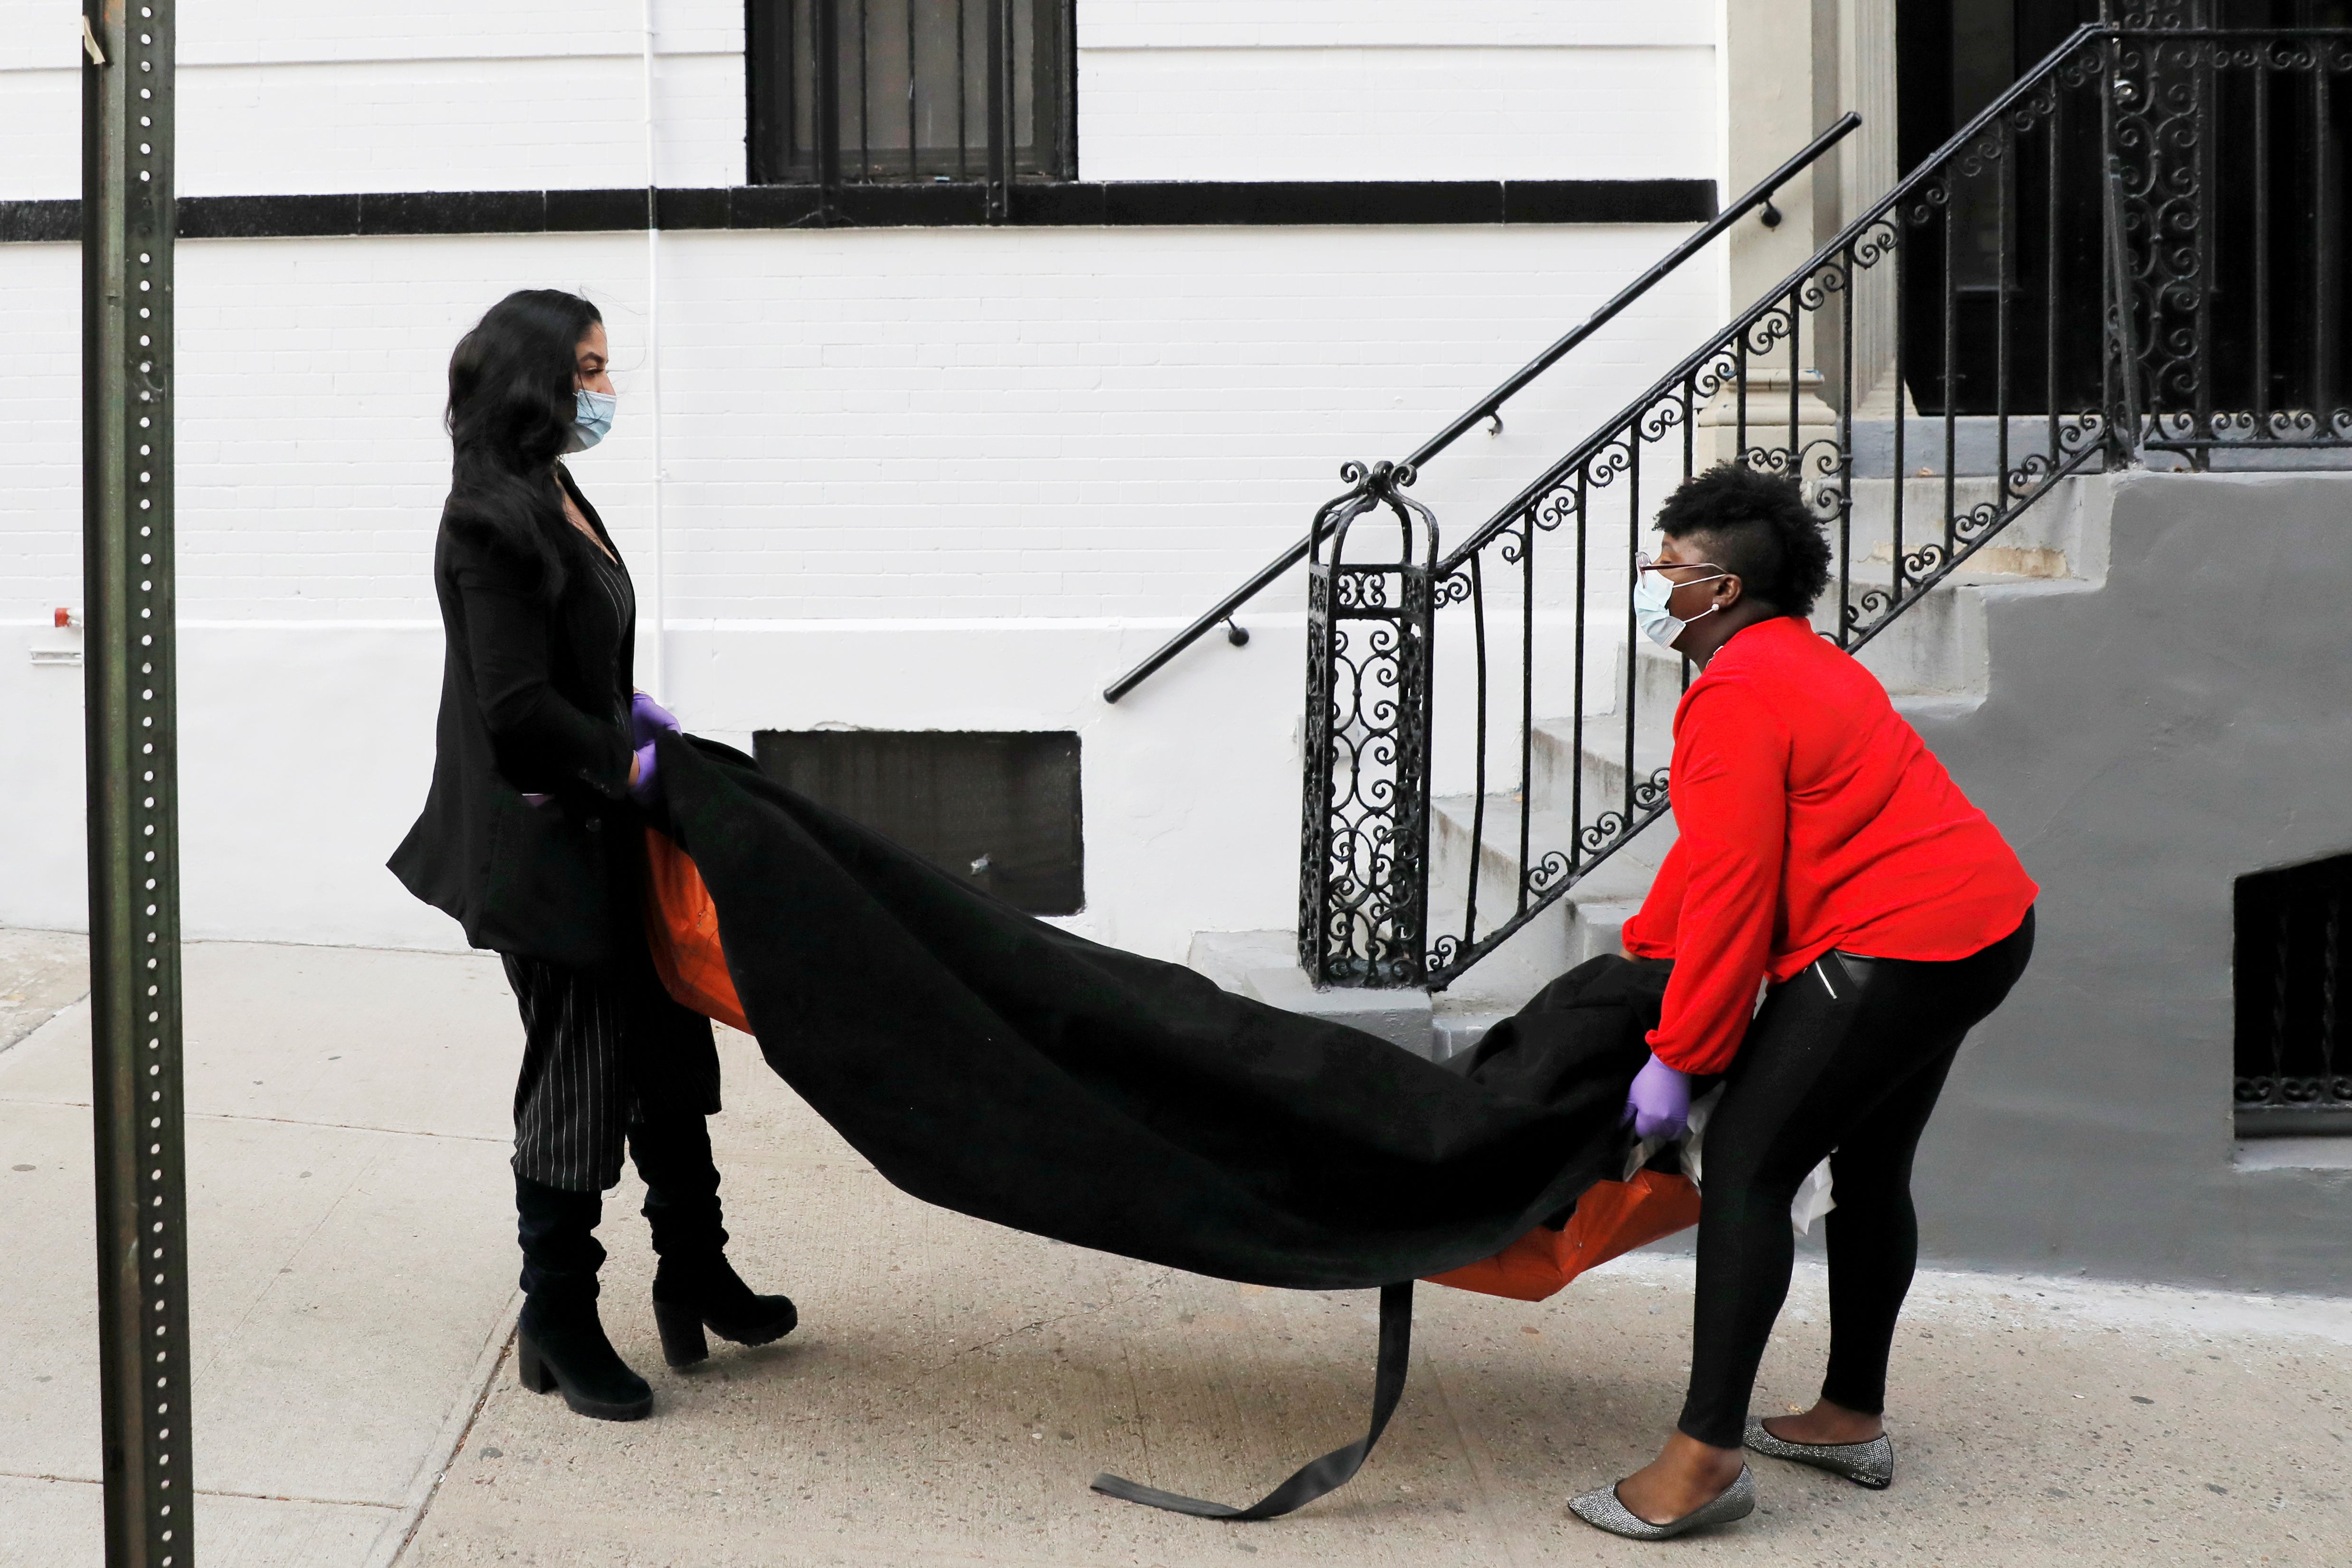 Undertakers Alisha Narvaez and Nicole Warring carry the body of a dead person to the basement of the funeral home where they both work, in Harlem, New York City, in April